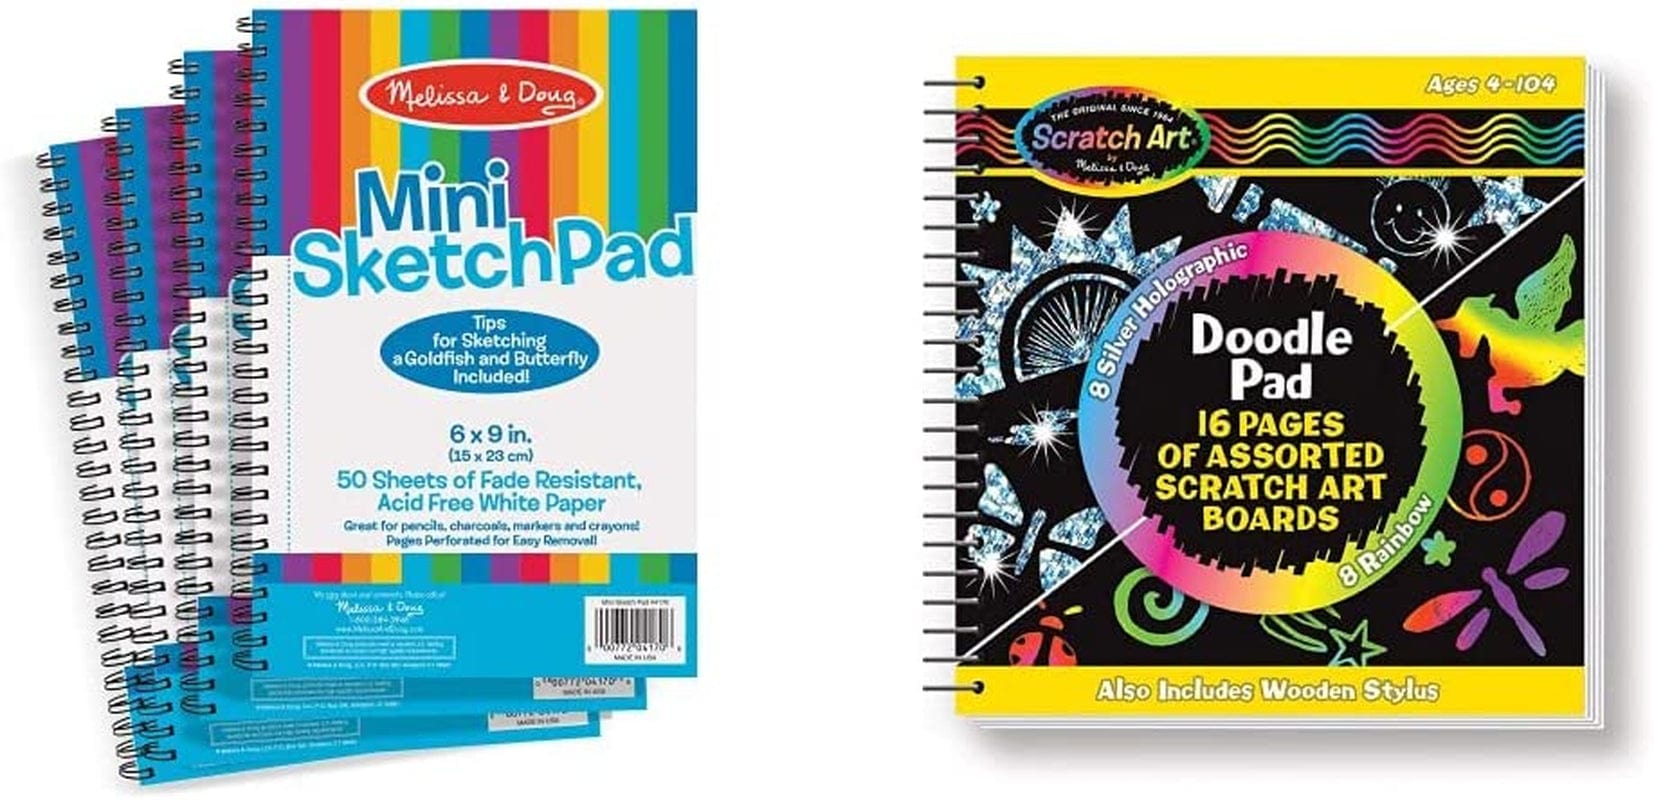 drawing book for kids and Drawing pad easy to draw step by step by